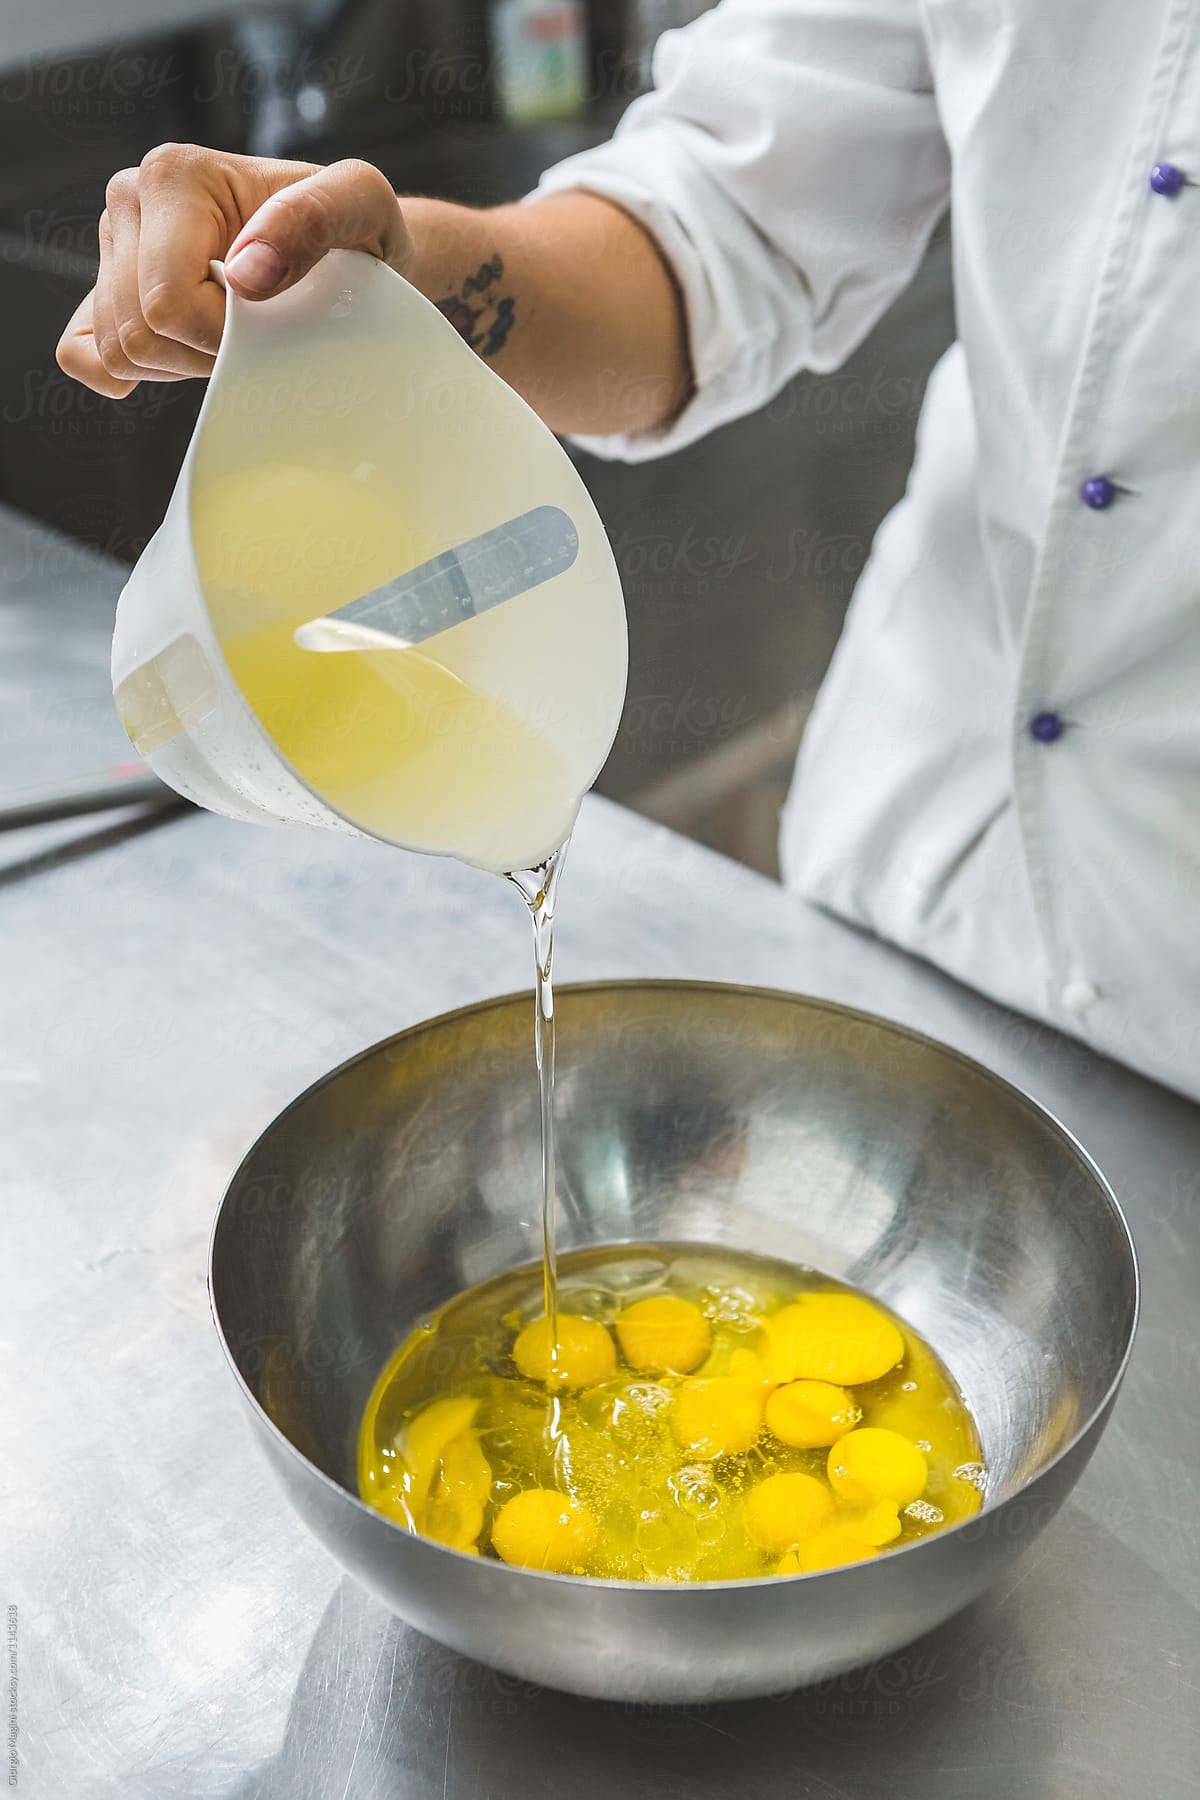 Pastry Chef Pouring Oil to a Bowl Full of Eggs